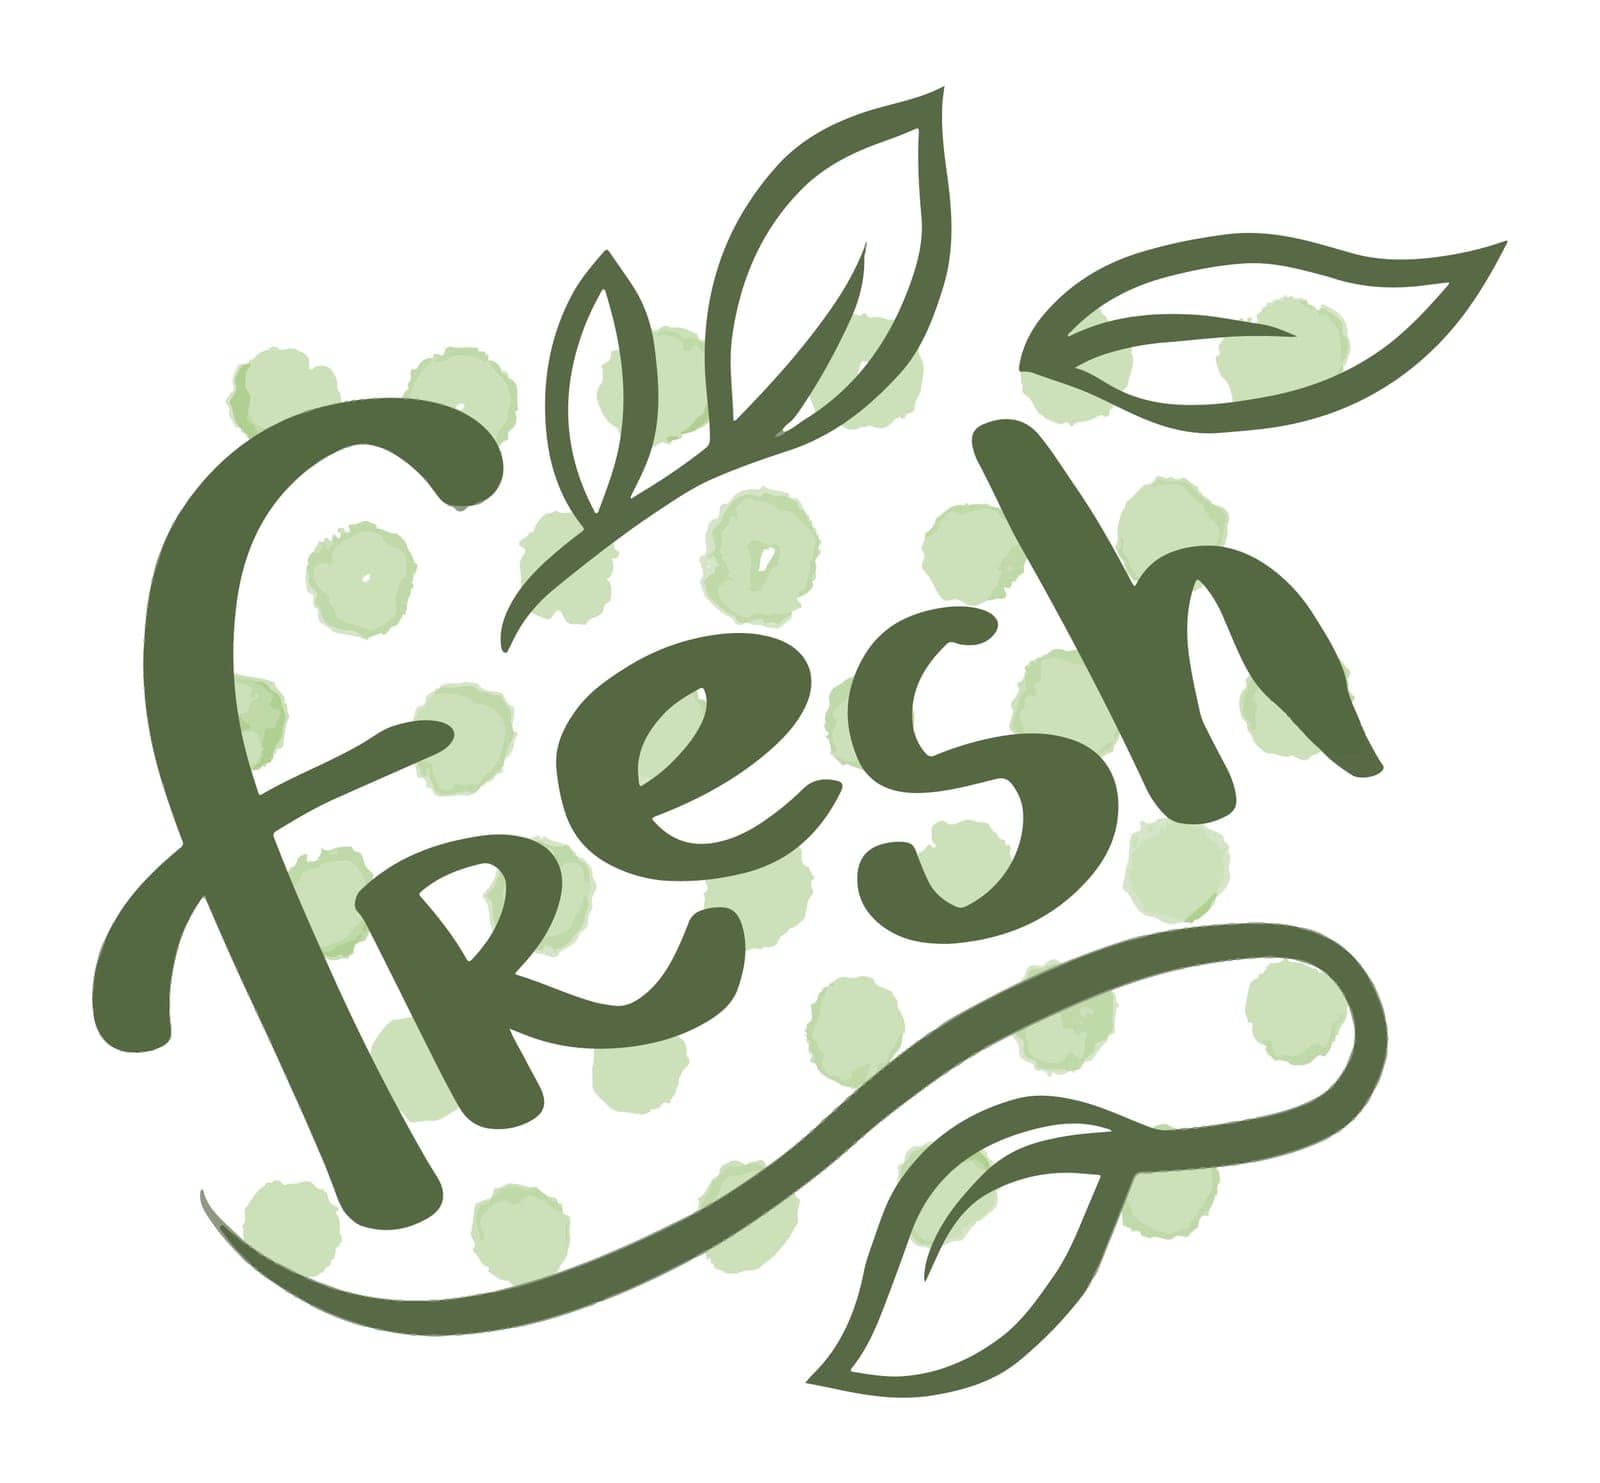 Natural and fresh products, vegan and vegetarian, ecologically friendly and environmentally safe. Sticker with leaves and inscription. Label or banner, emblem or logotype. Vector in flat style